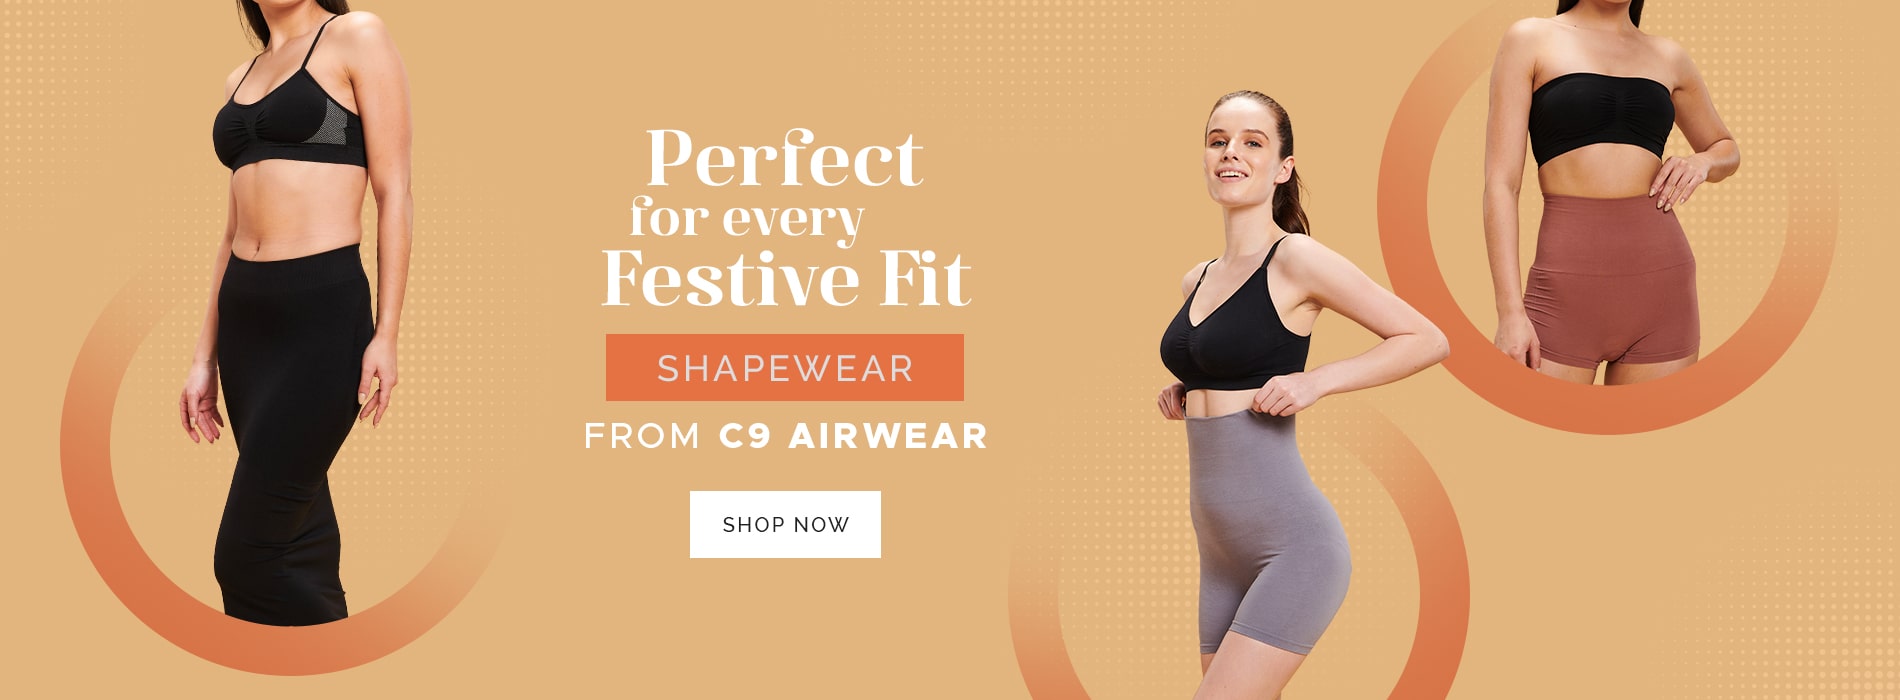 C9 Airwear - #Athleisures that let you be your strongest